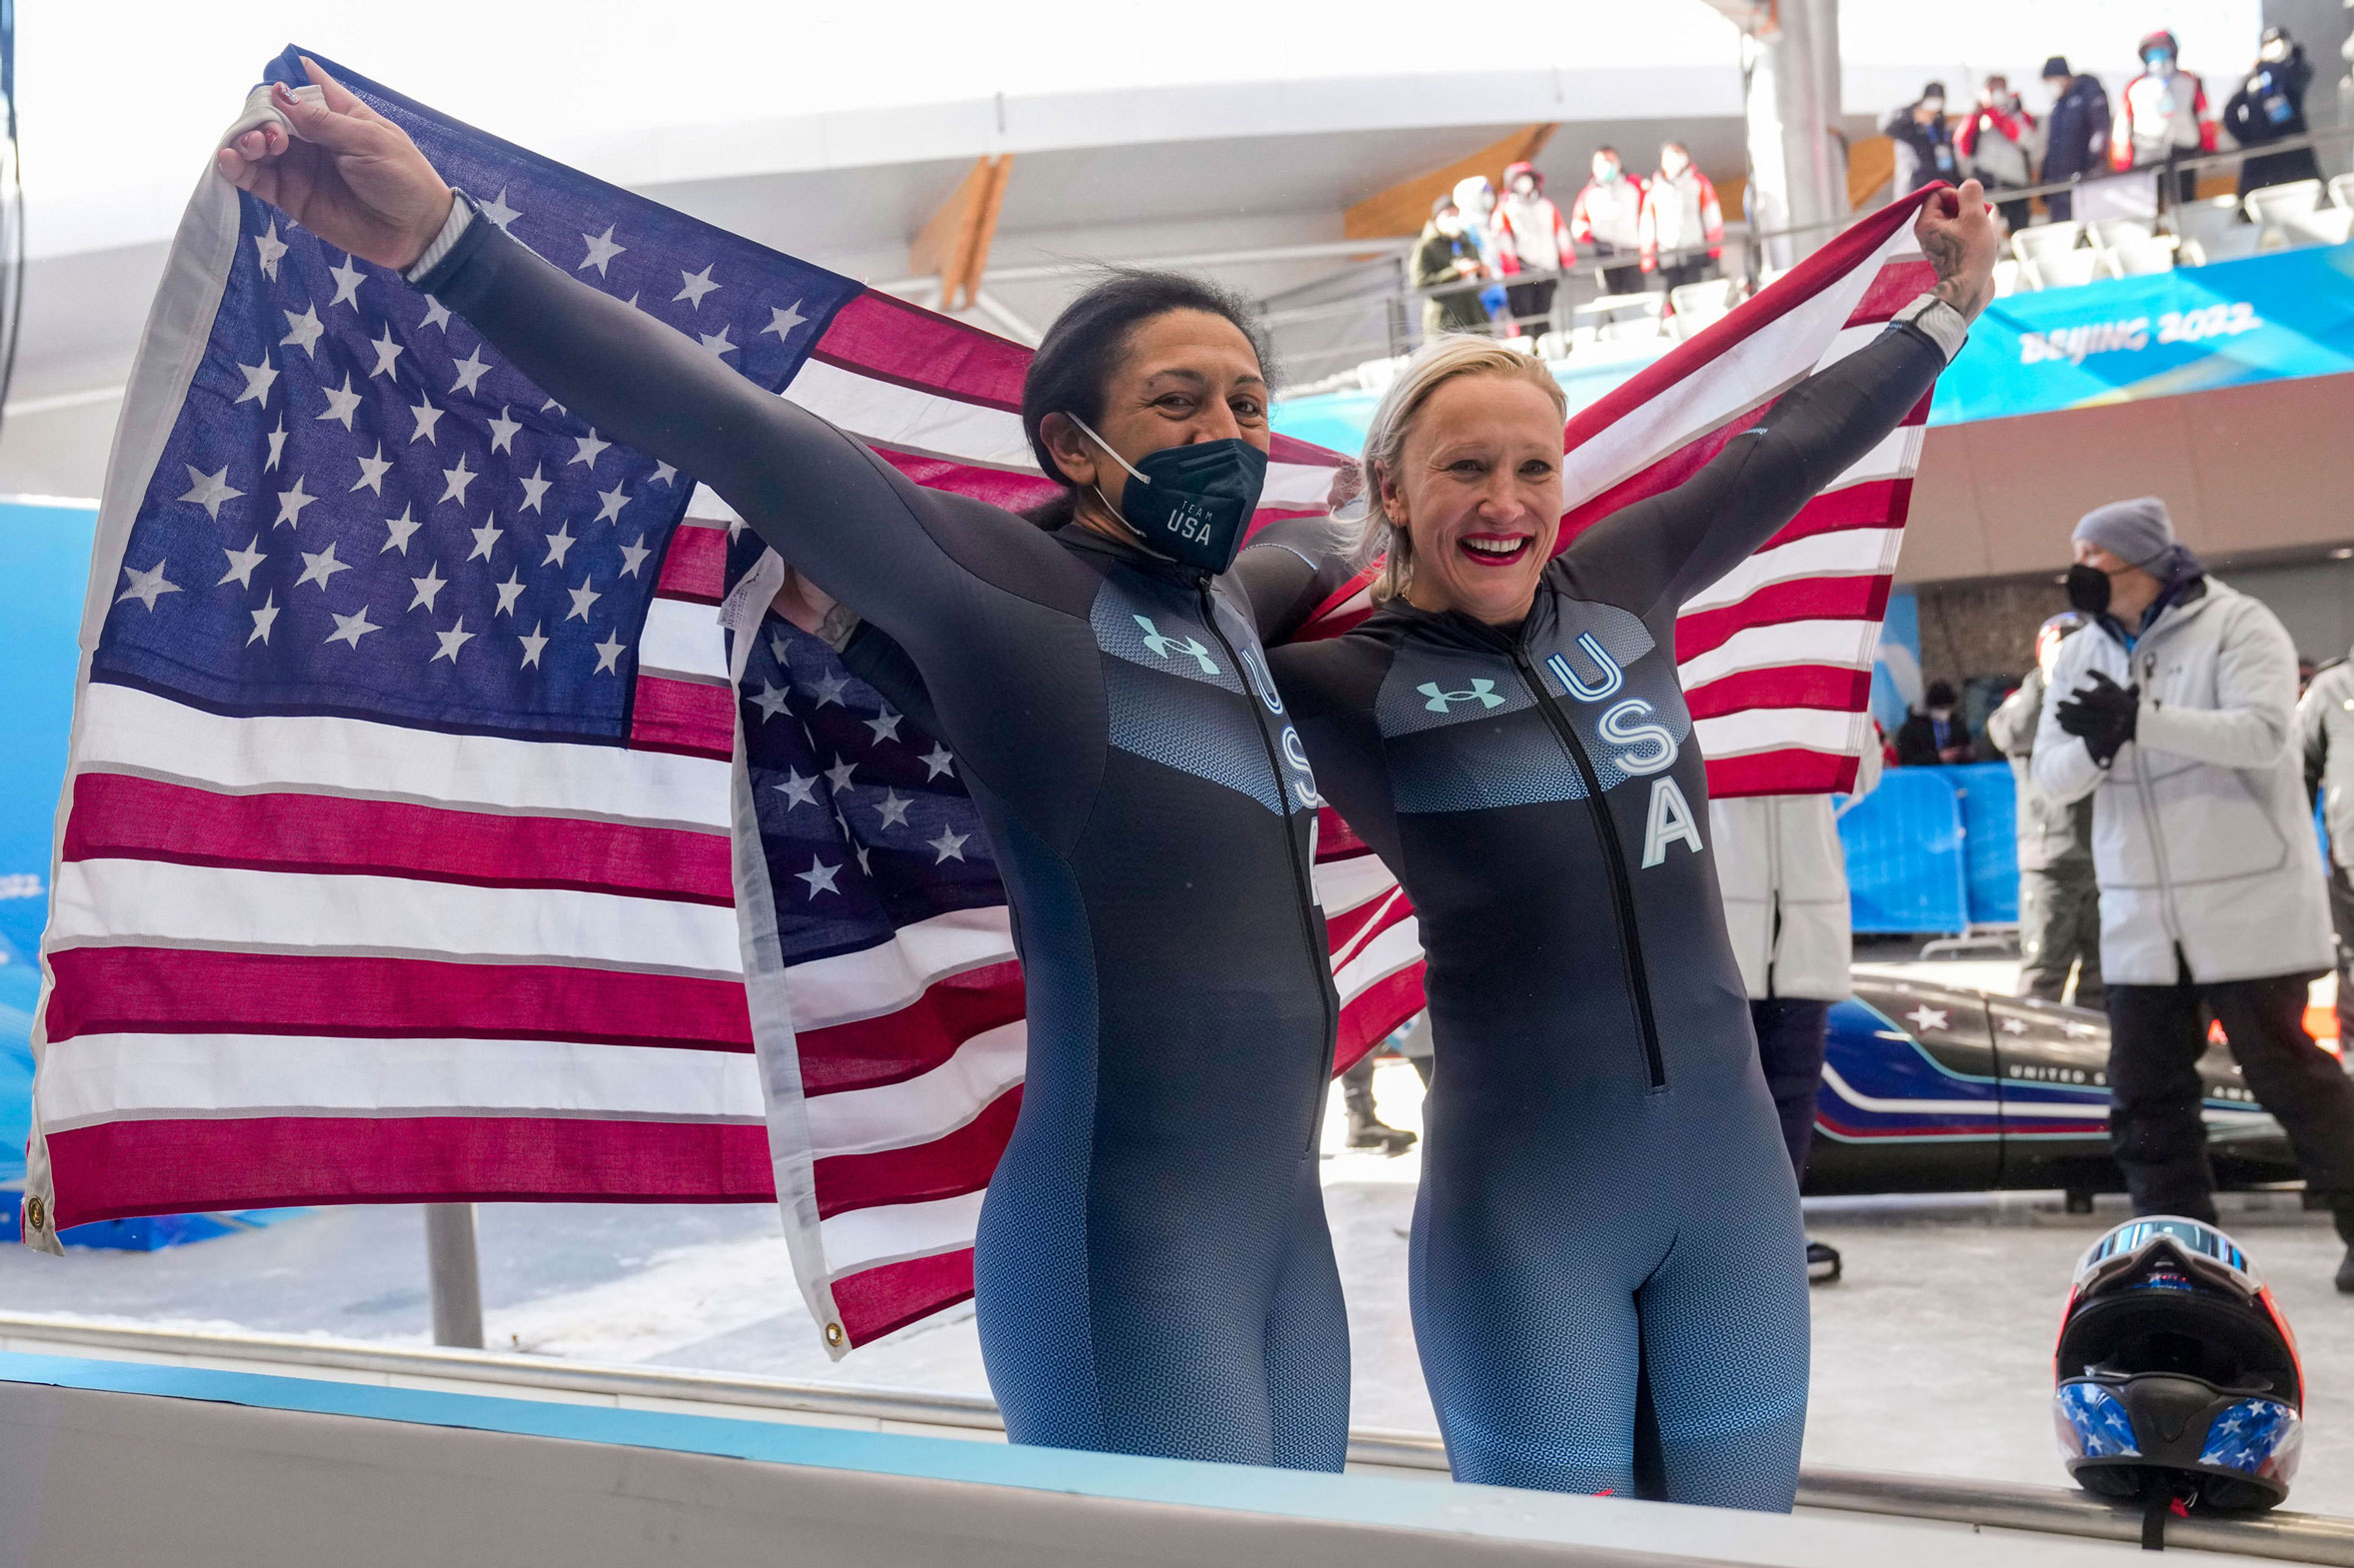 Team USA’s Kaillie Humphries and Elana Meyers Taylor top the podium in monobob’s Olympic debut